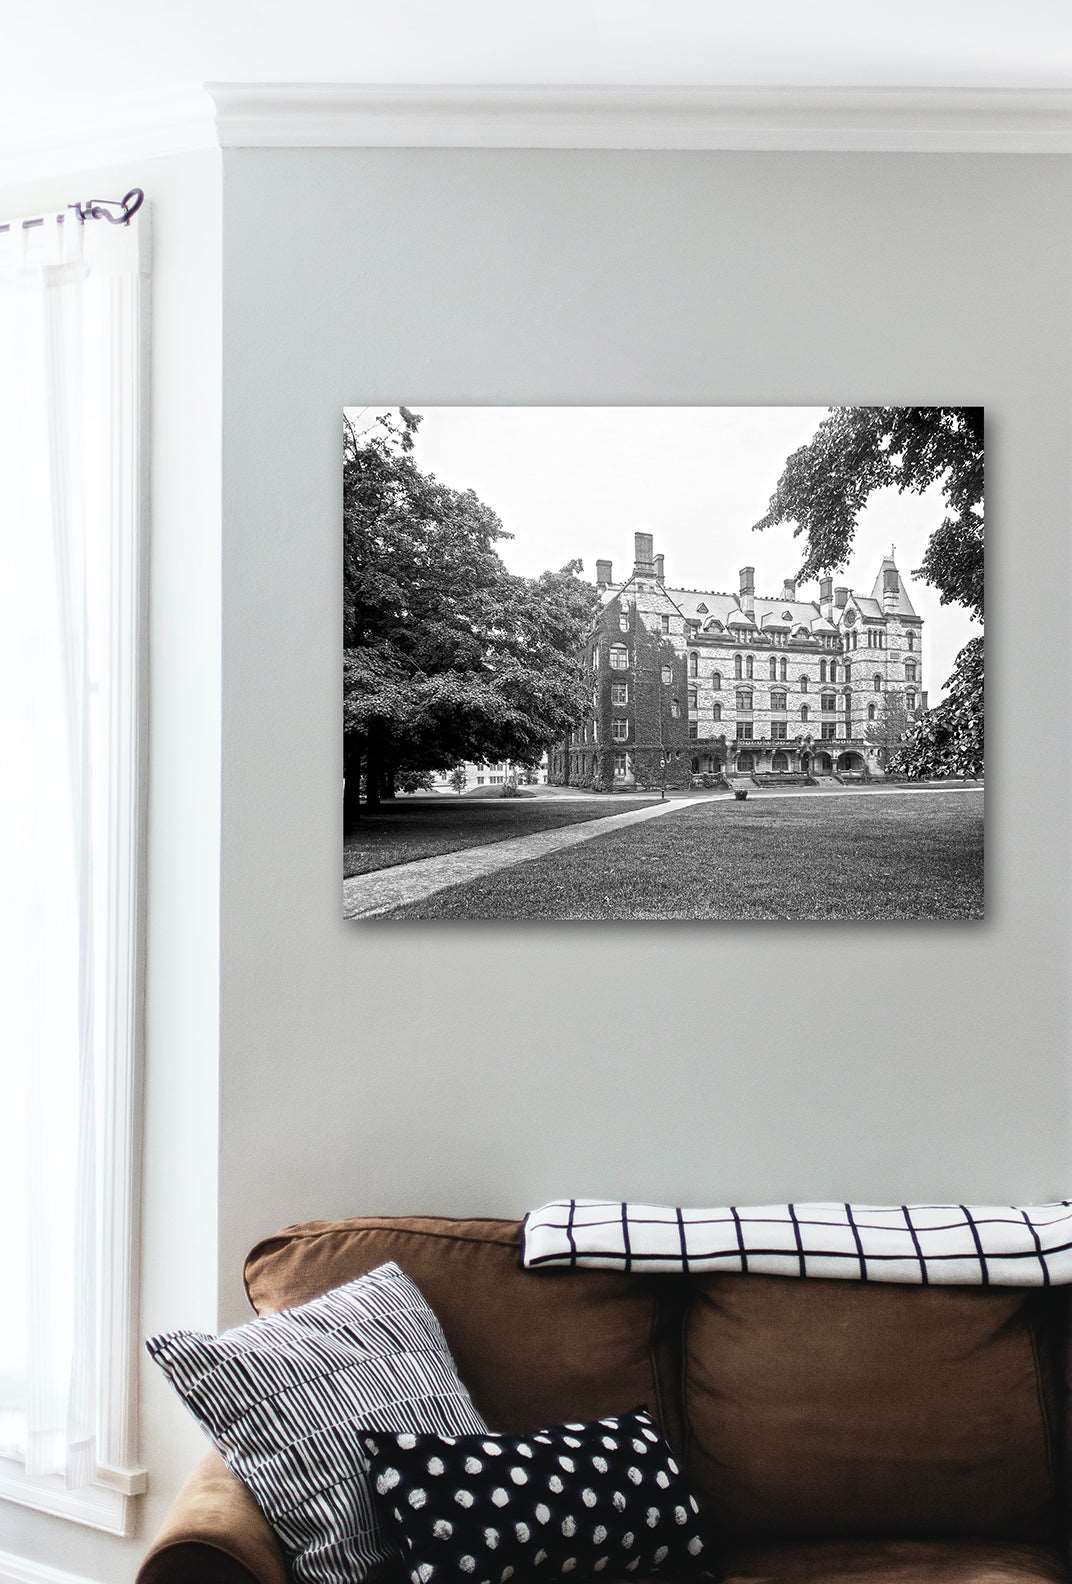 A canvas print of a photograph of Princeton University's Witherspoon Hall hanging above a brown couch